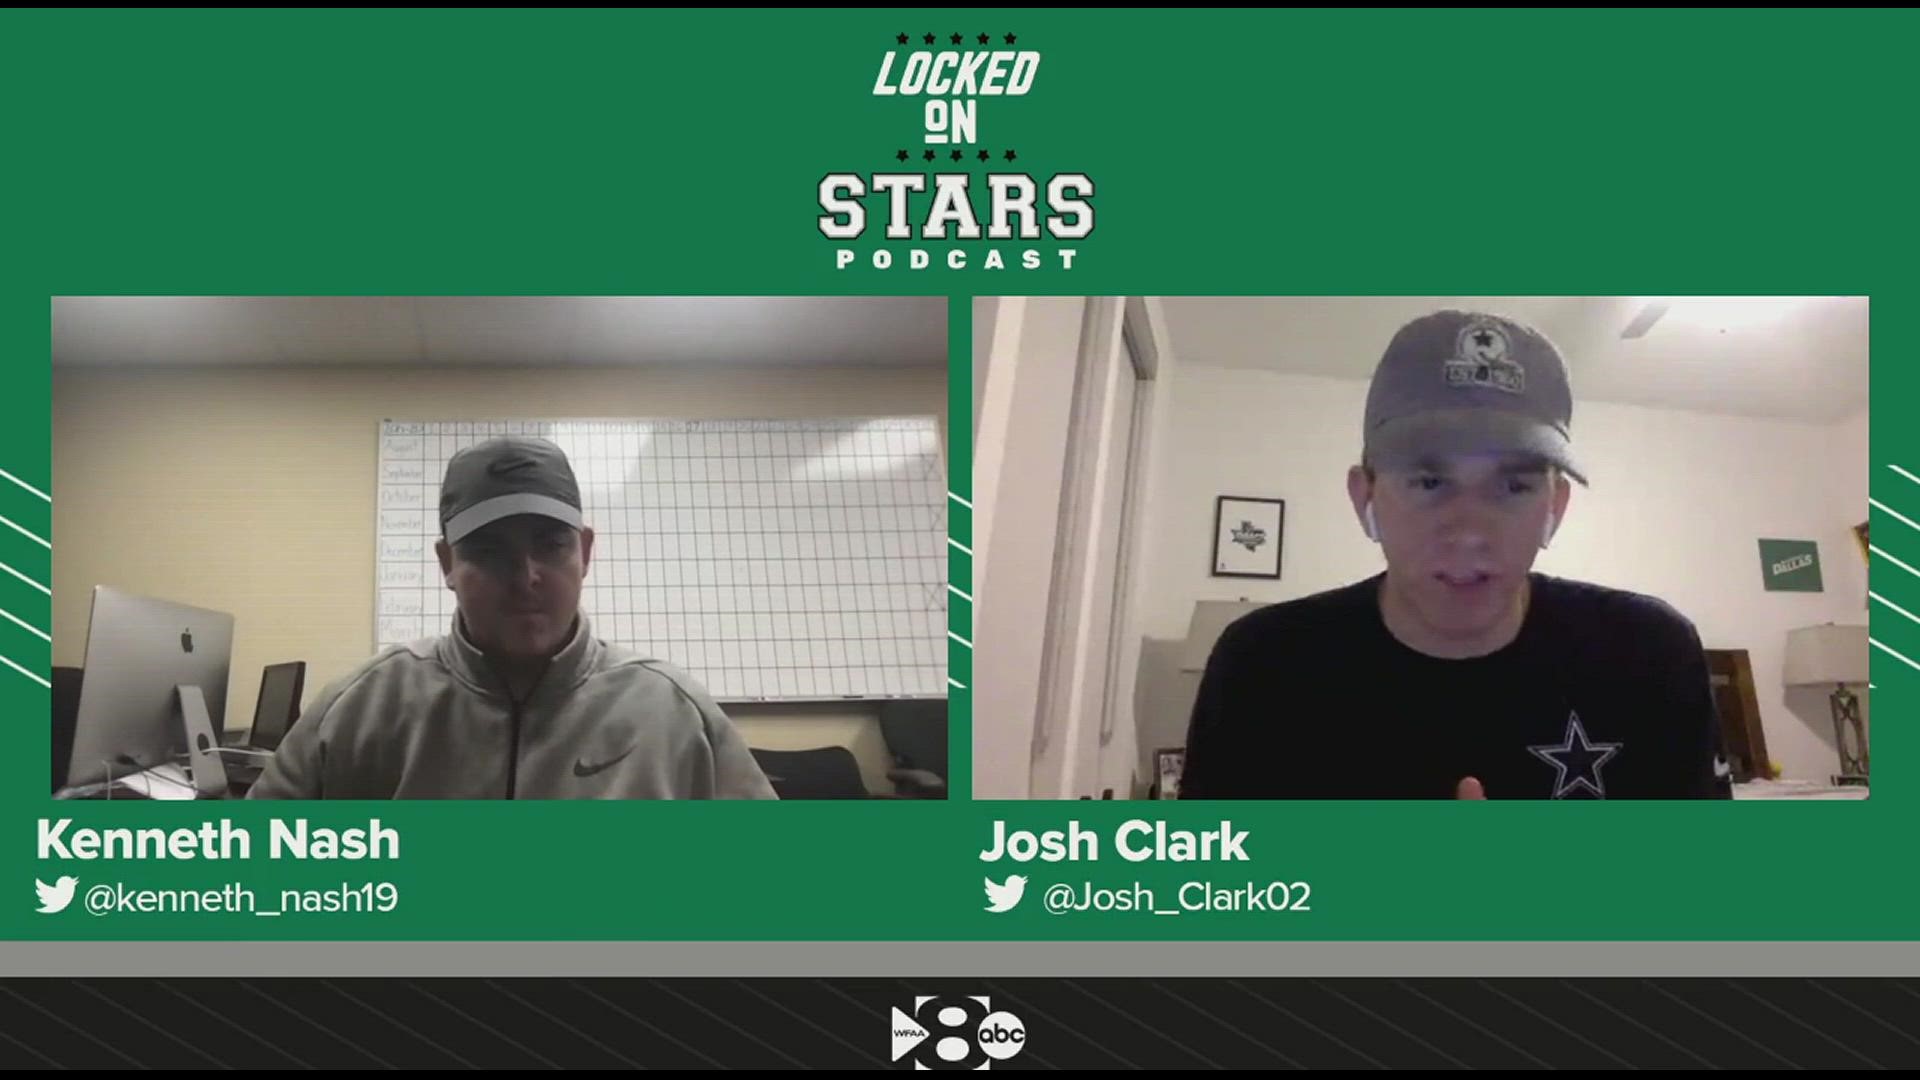 Josh Clark and Kenneth Nash provide updates on the latest discussions between the league and the Players' Association over plans for the 2021 season.